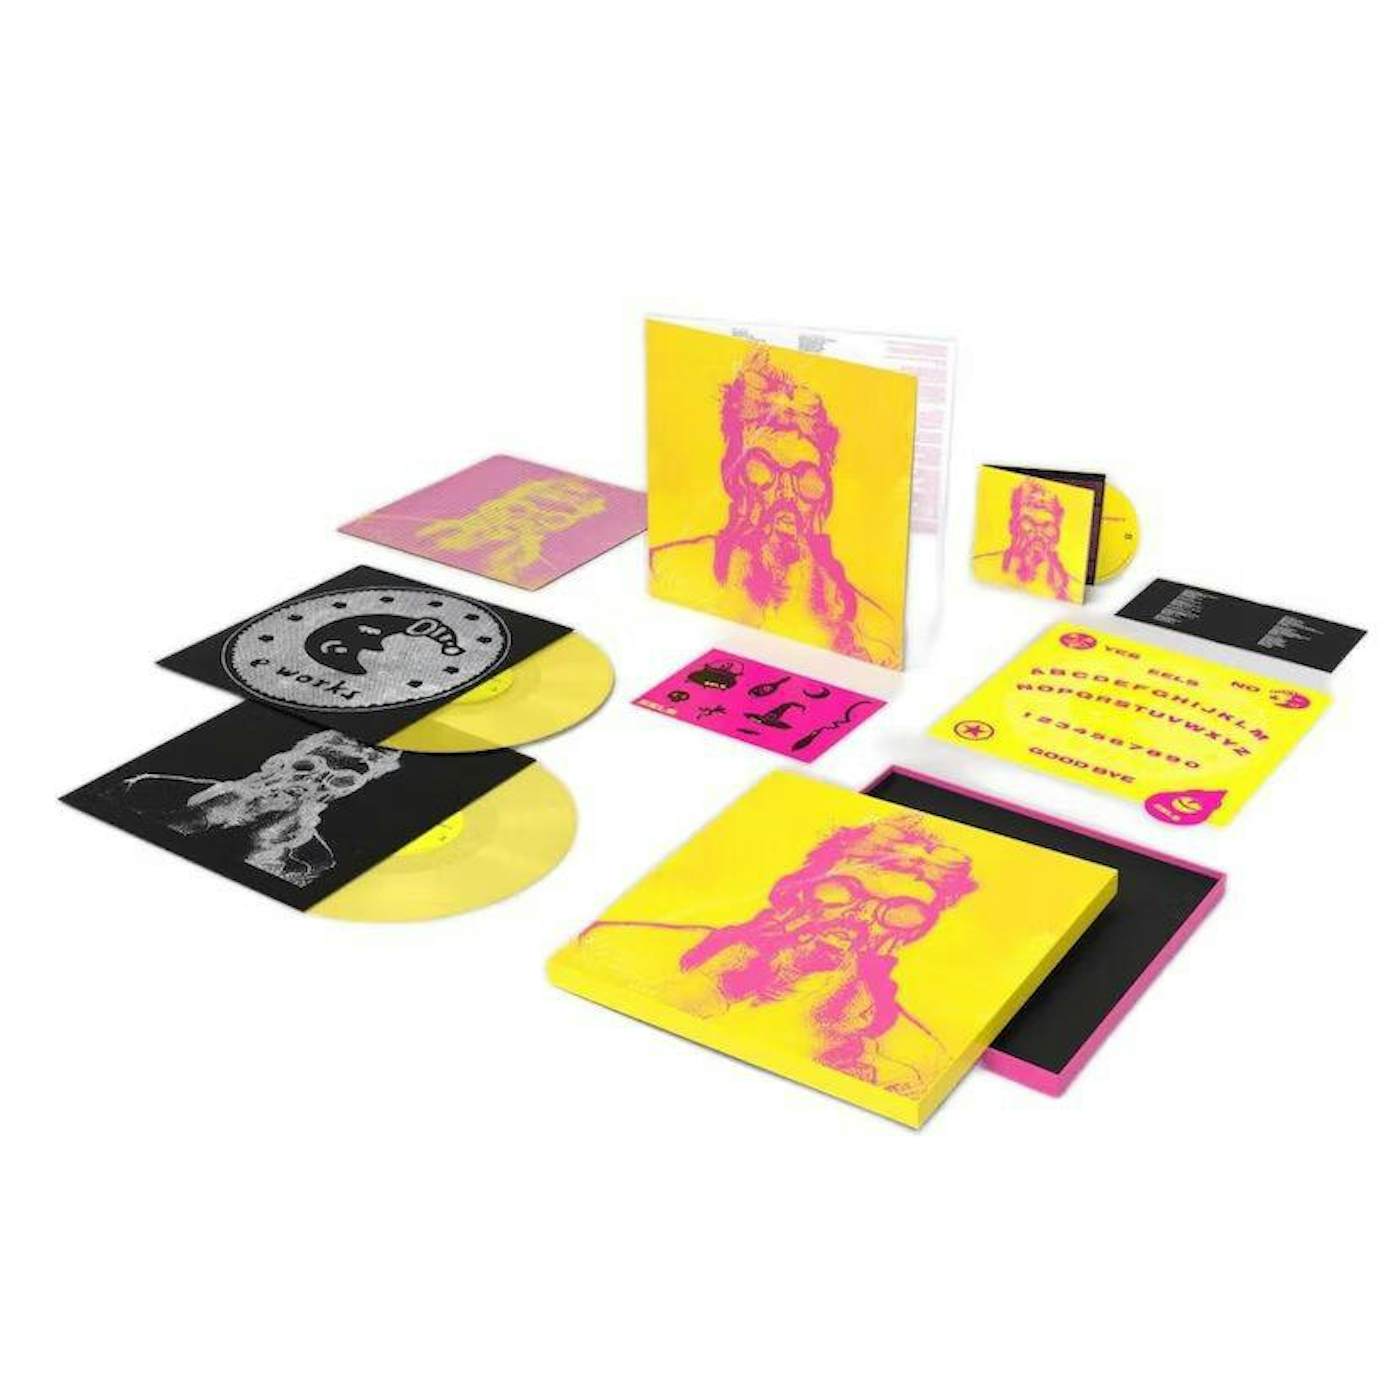  Eels: Extreme Witchcraft (Box Set/2LP/Yellow Limited Deluxe/CD) Vinyl Record